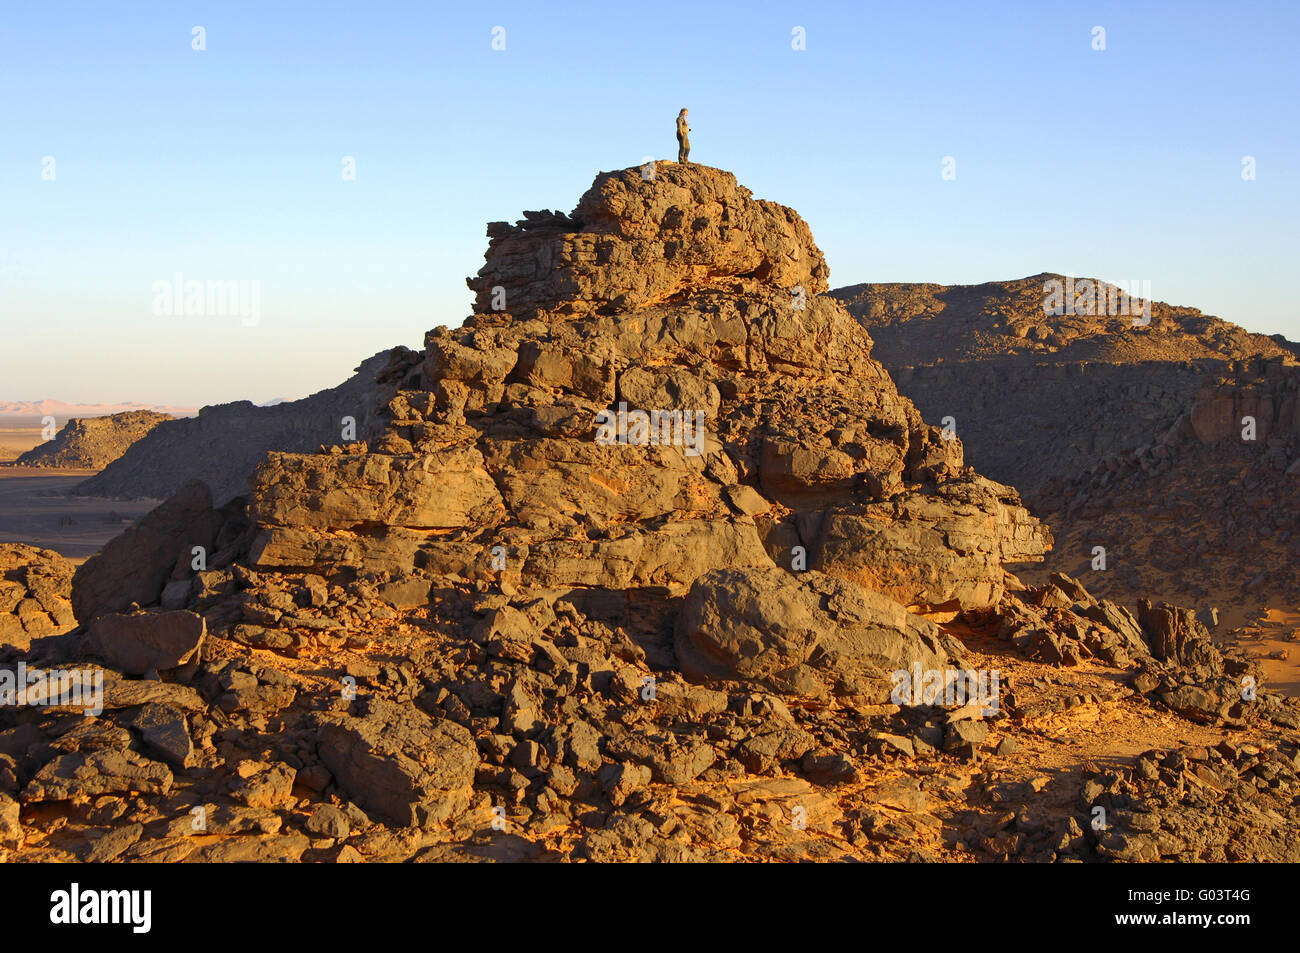 A person standing on an eroded rock hill, Sahara Stock Photo